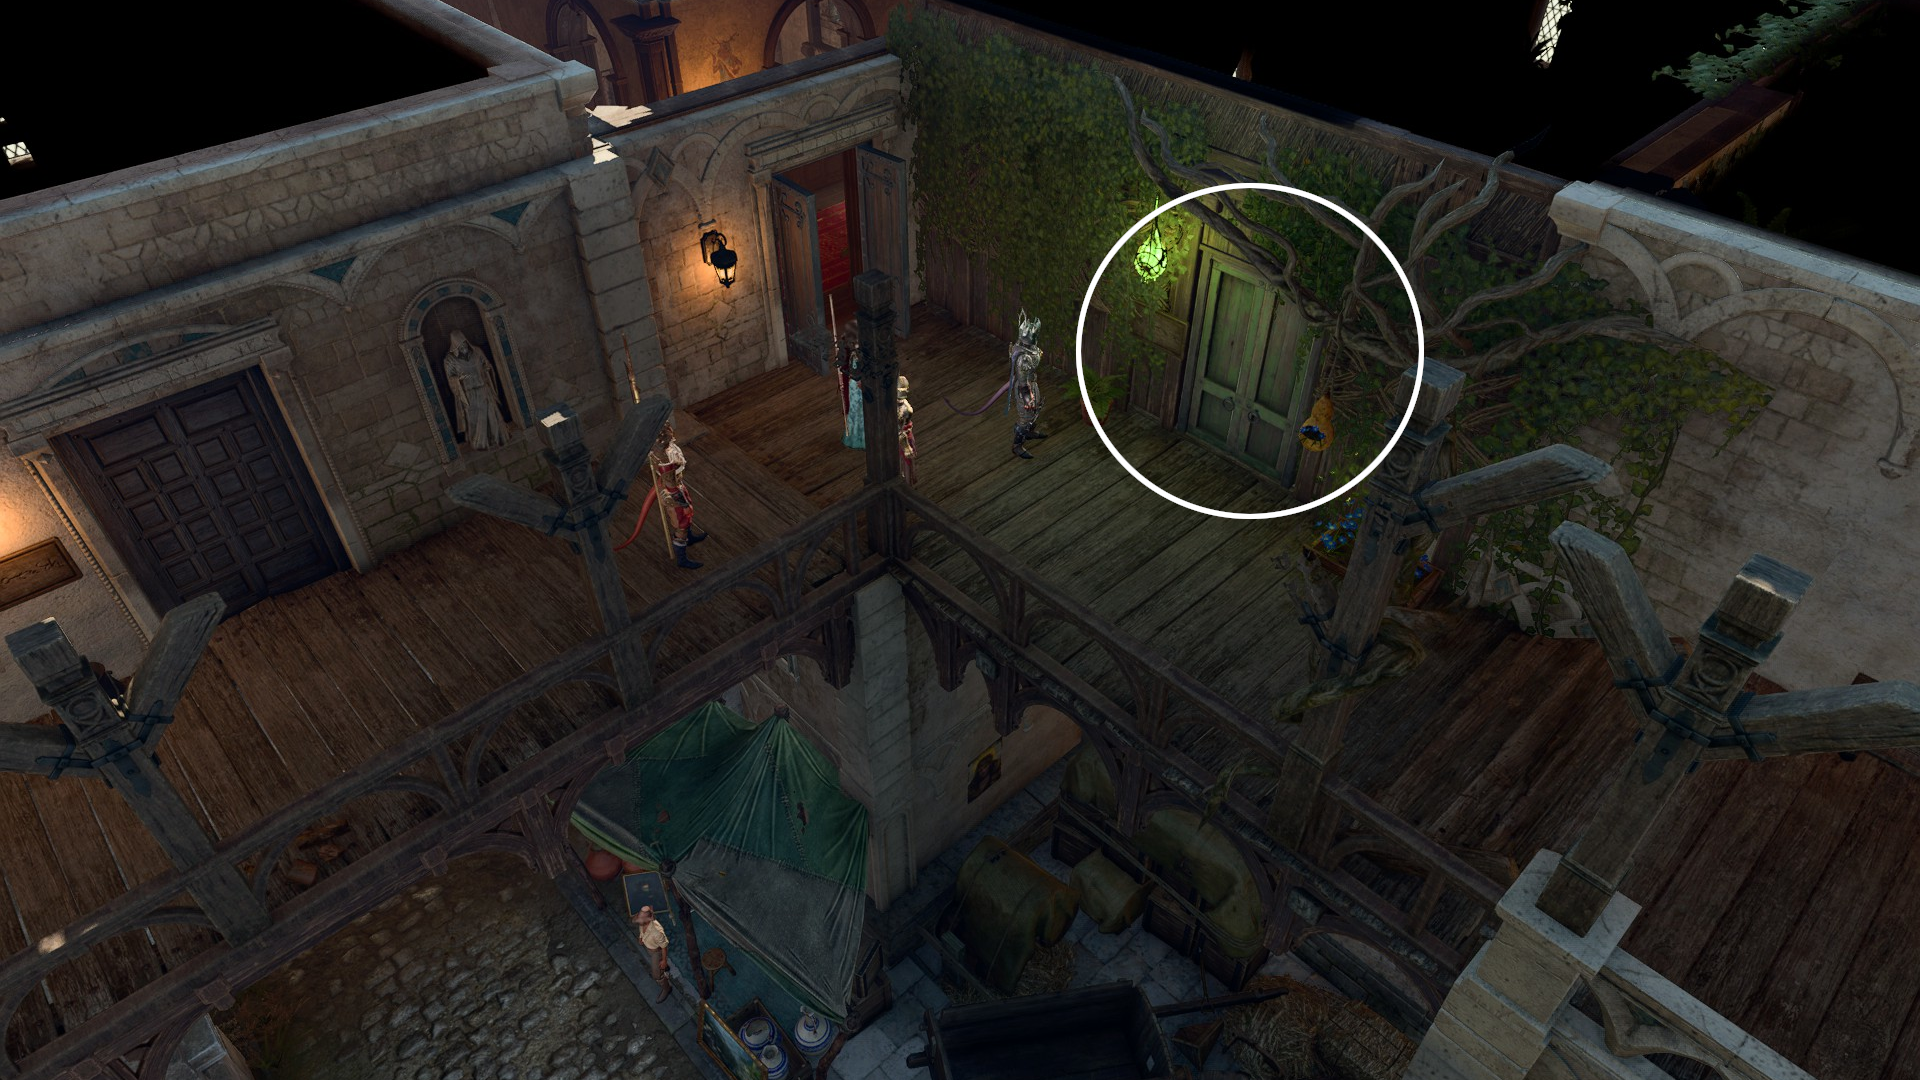 An image showing the door to the Nymph's Caress in Baldur's Gate 3.